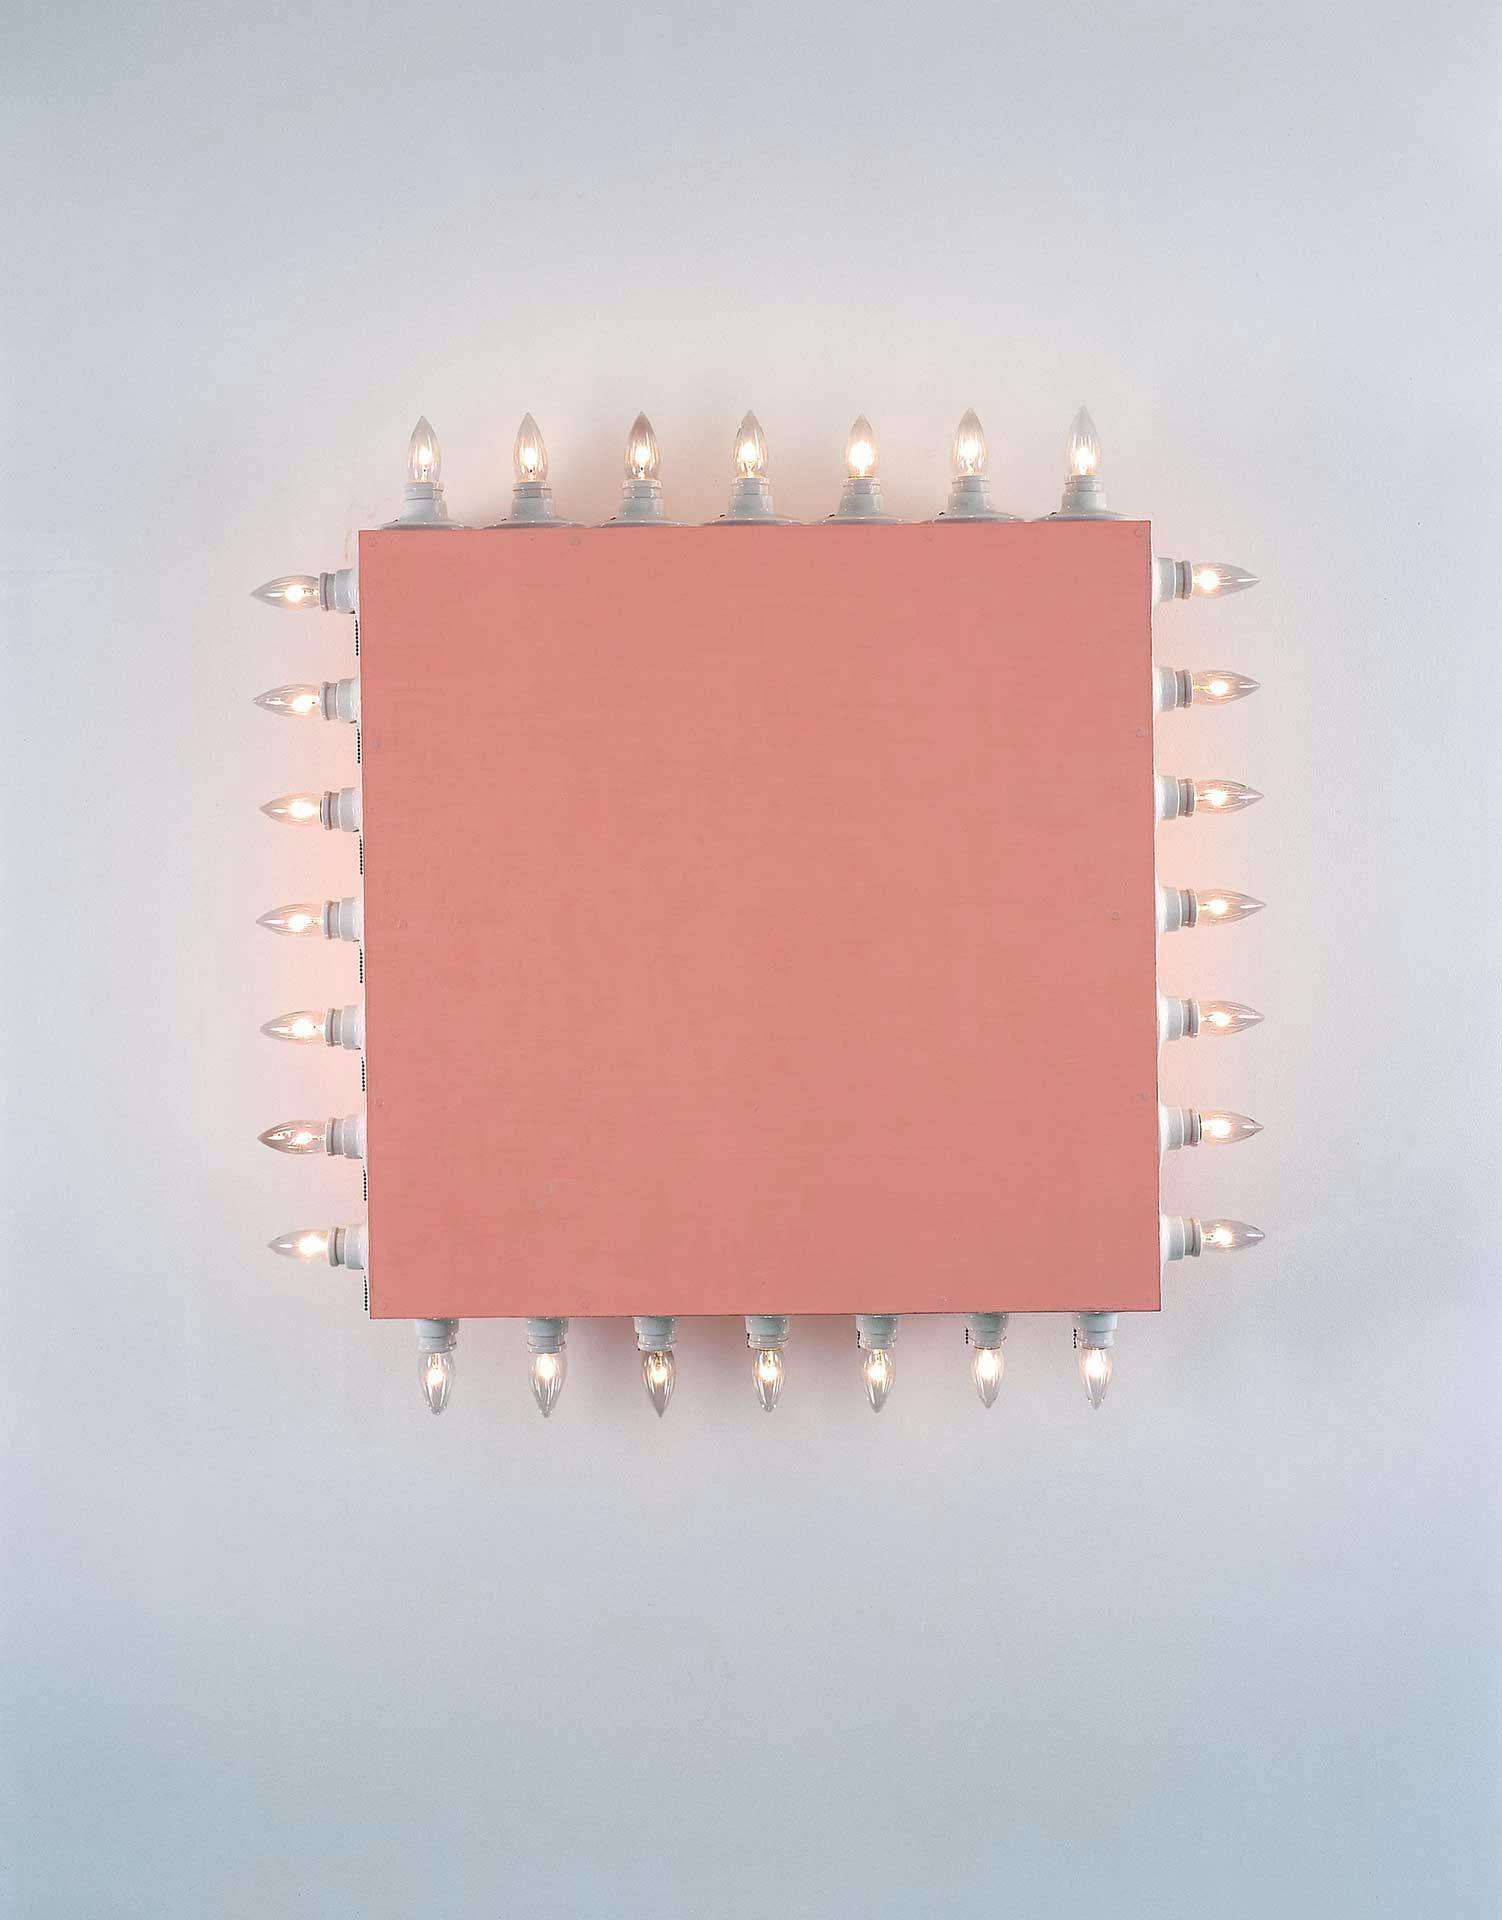 A mixed media wall-mounted sculpture by Dan Flavin, titled icon V (Coran's Broadway Flesh), dated 1962.